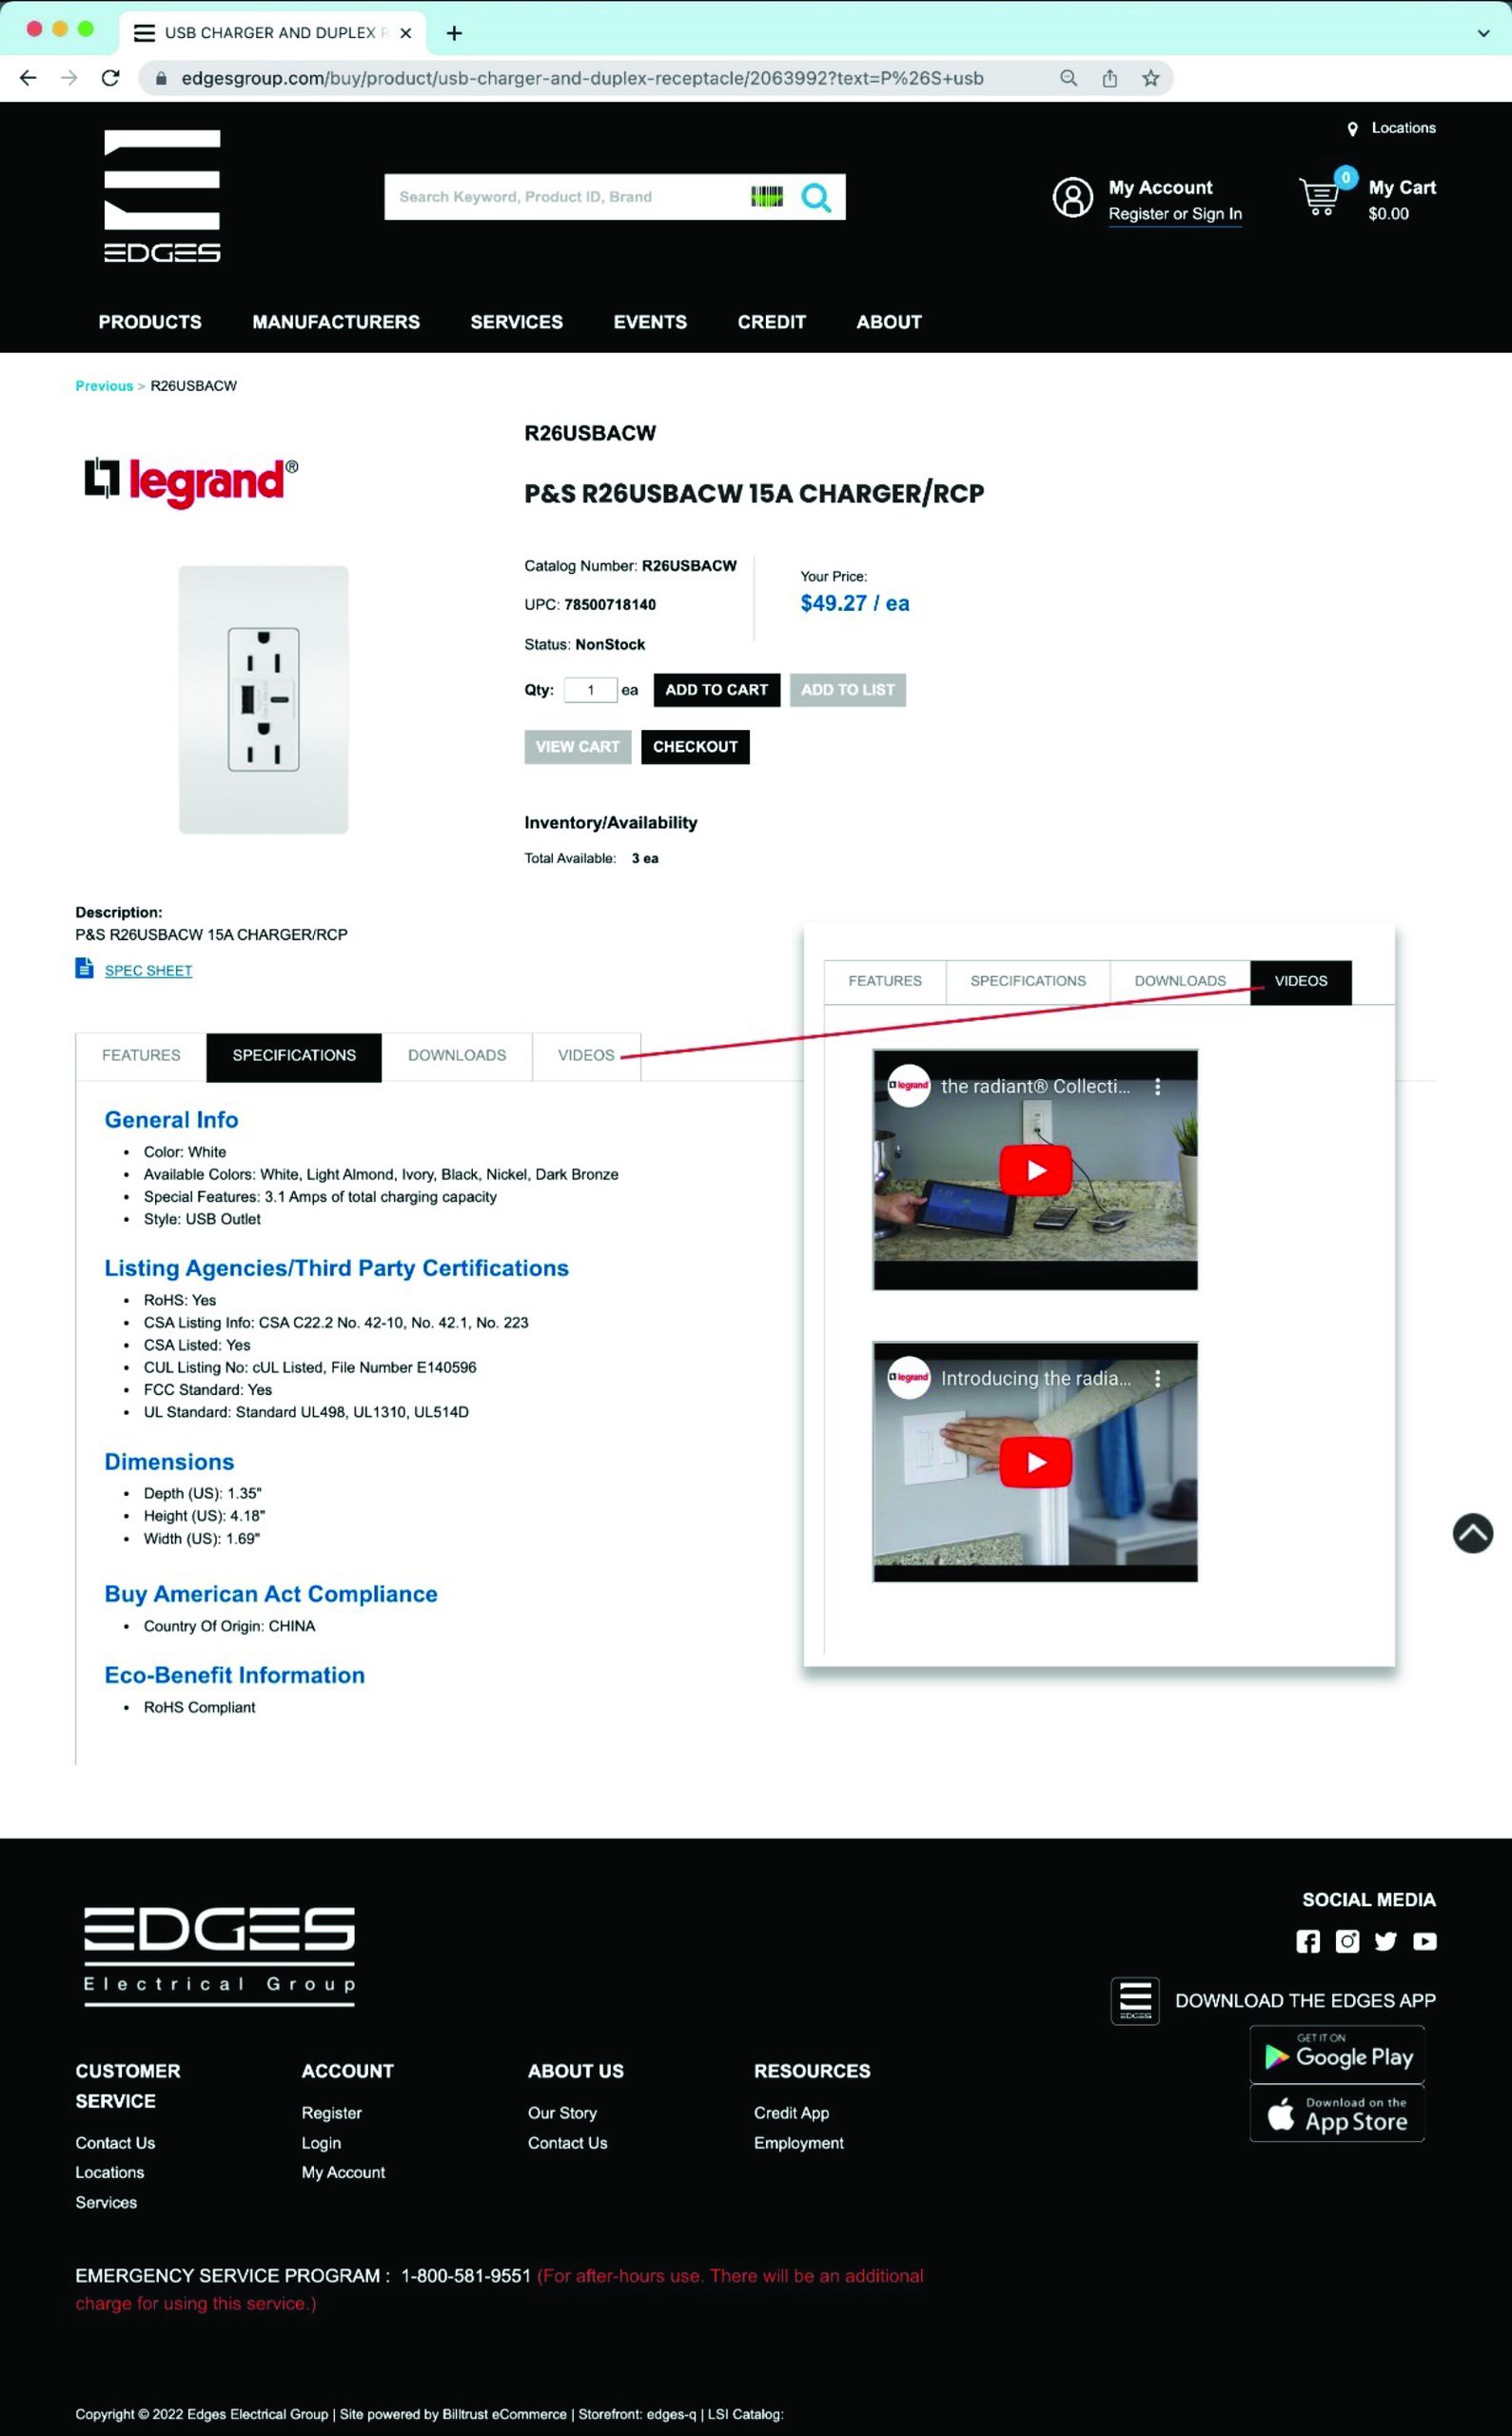 Sample product detail page for a Legrand product on Edges Electrical Group’s website (eCommerce Data provided by DDS).